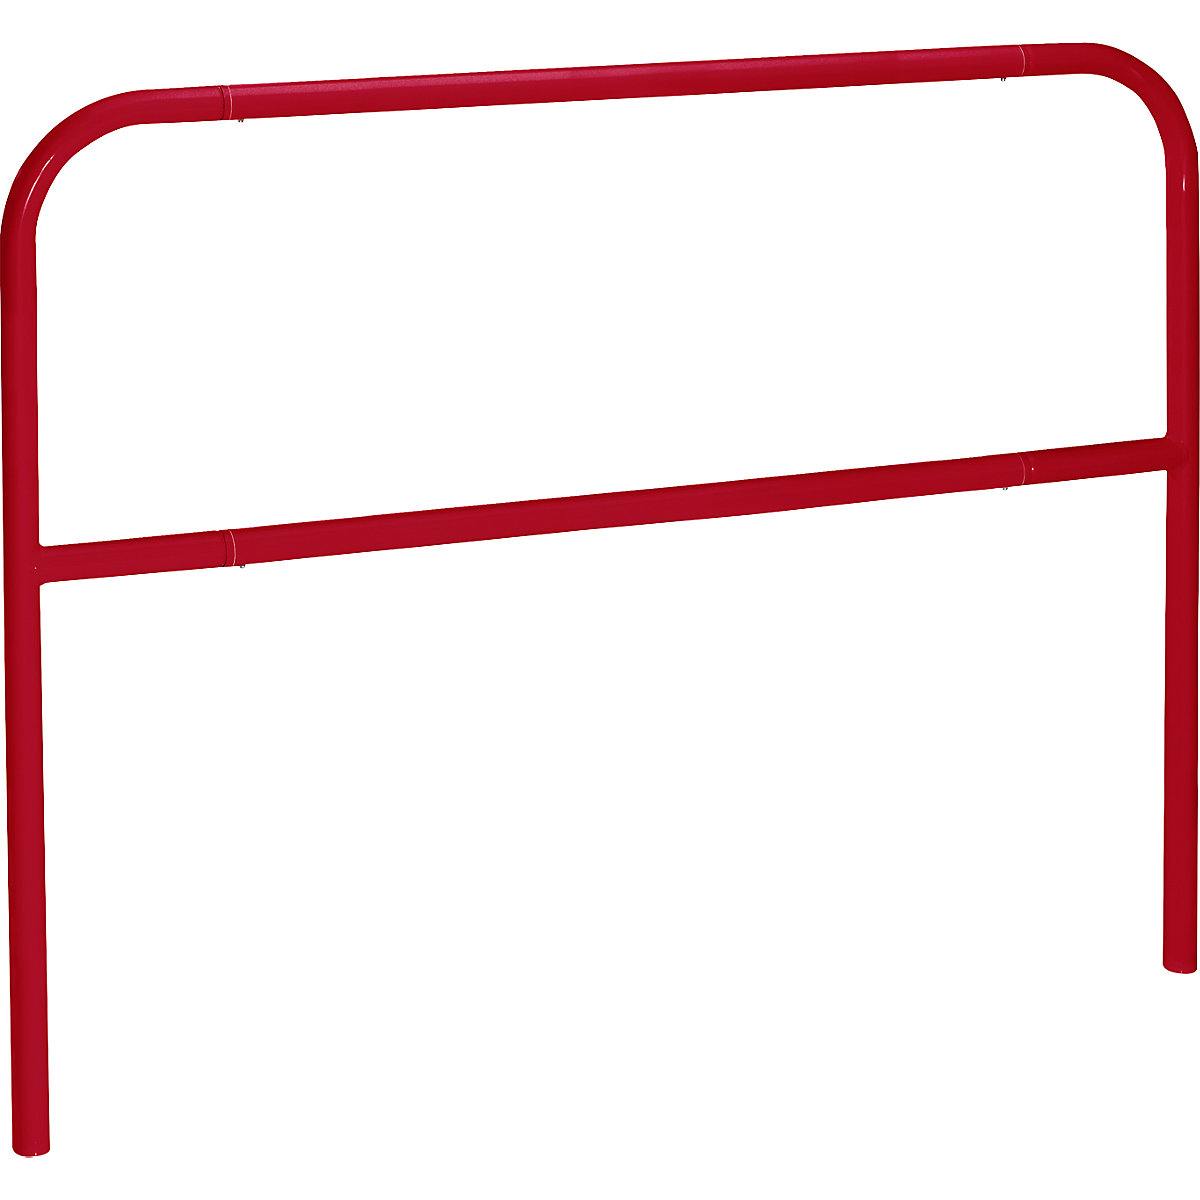 Crash protection bar, for setting in concrete, width 1500 mm, flame red-10